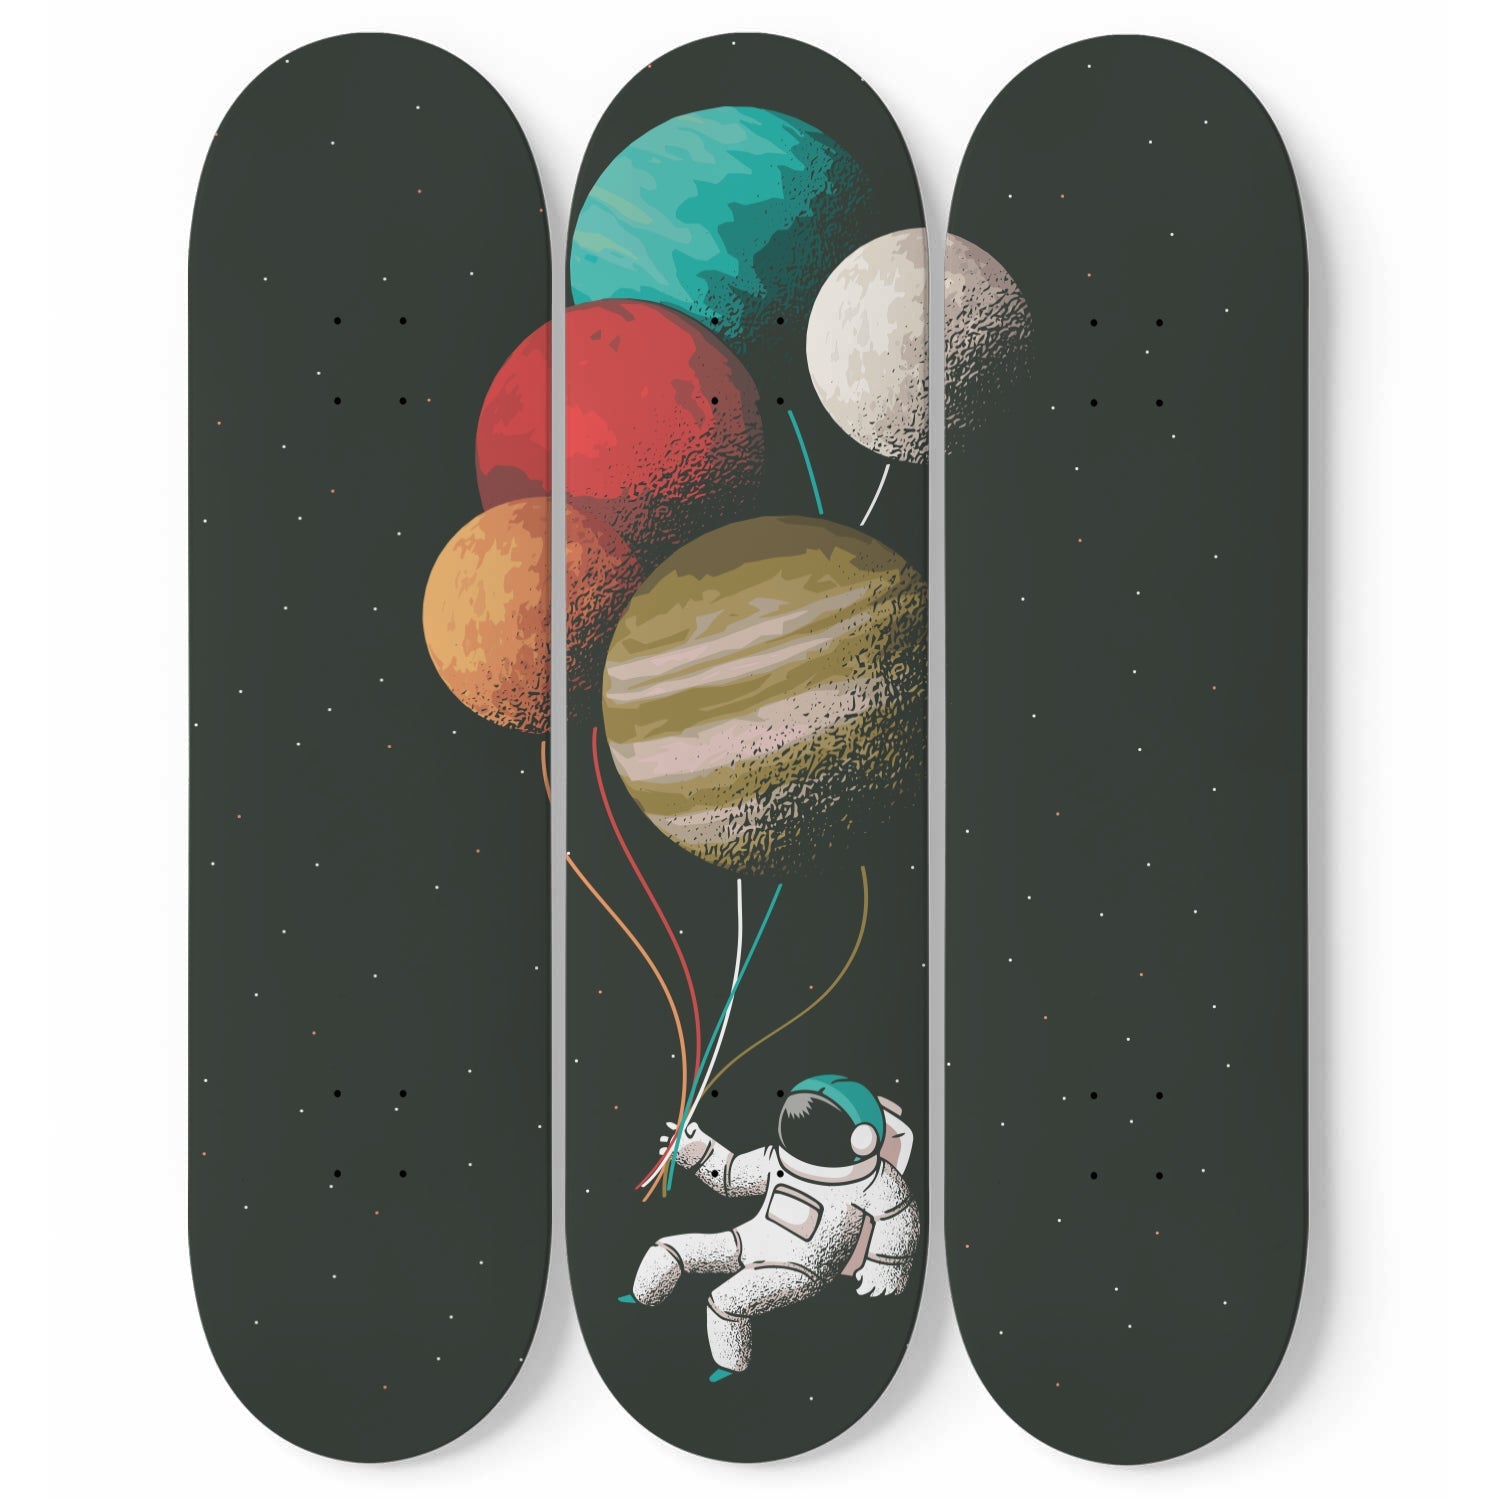 Space Odyssey #10.0 - Skater Wall